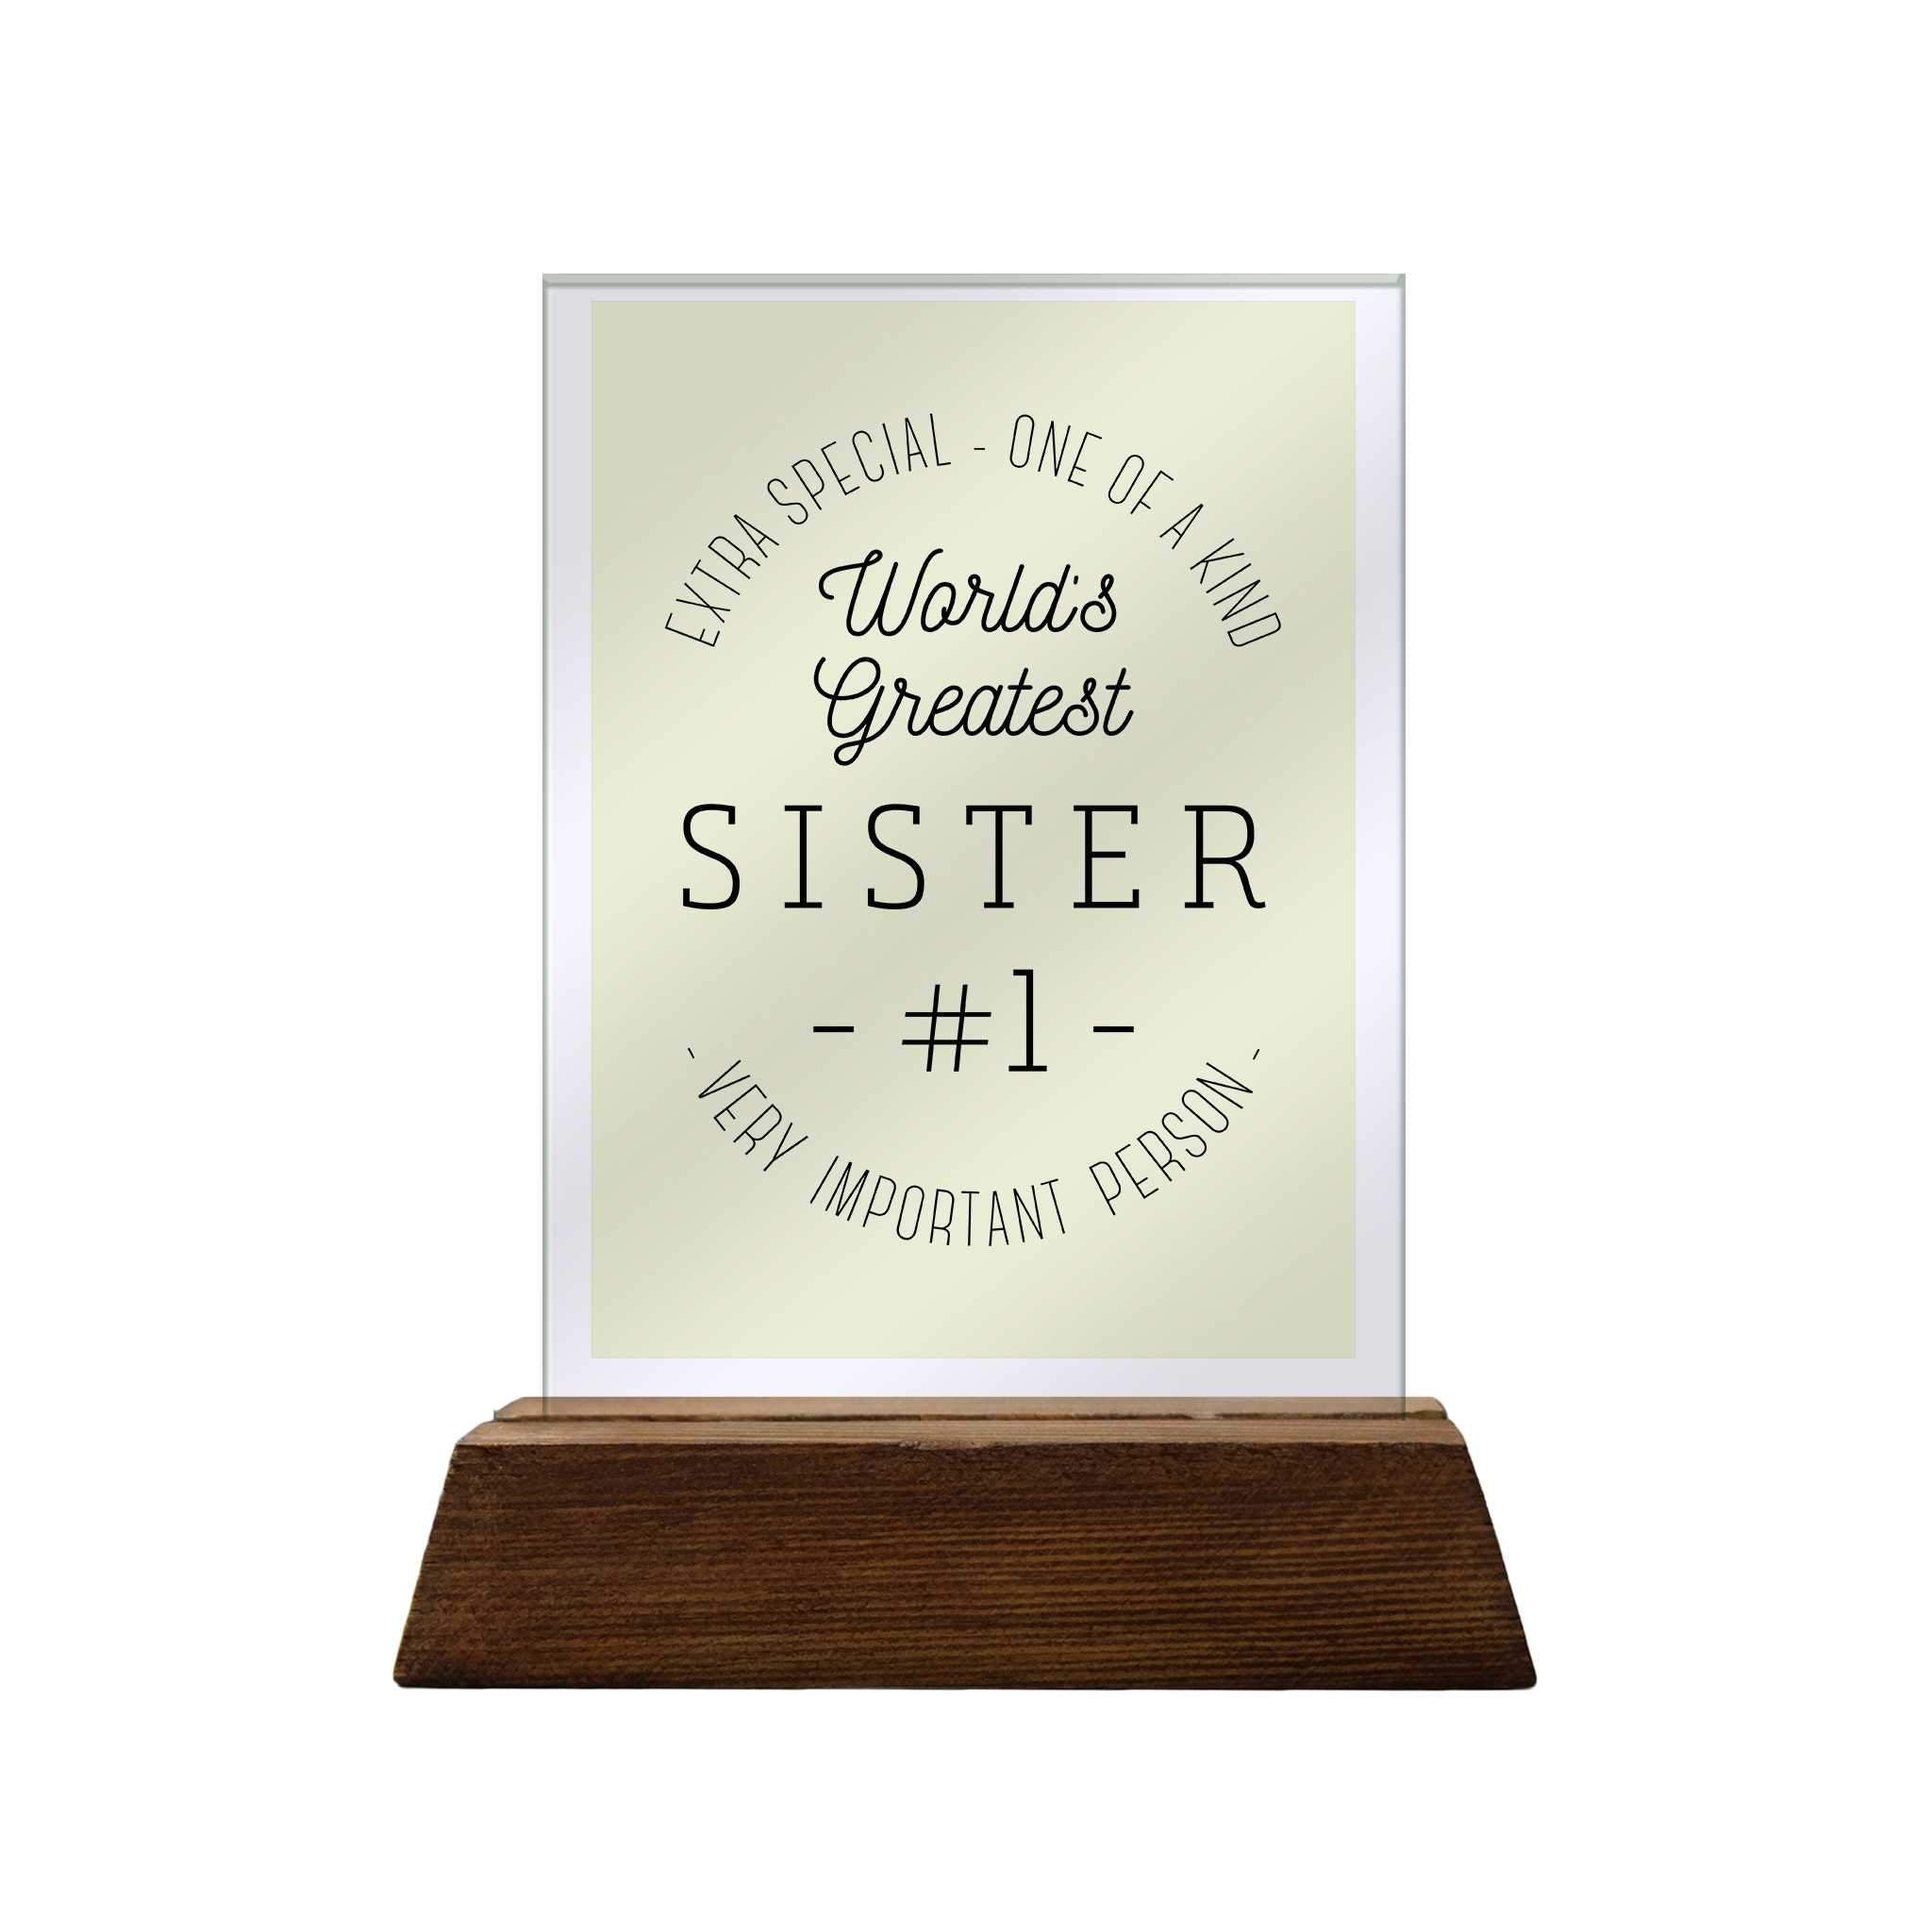 Extra Special One Of A Kind Sister Glass Plaque